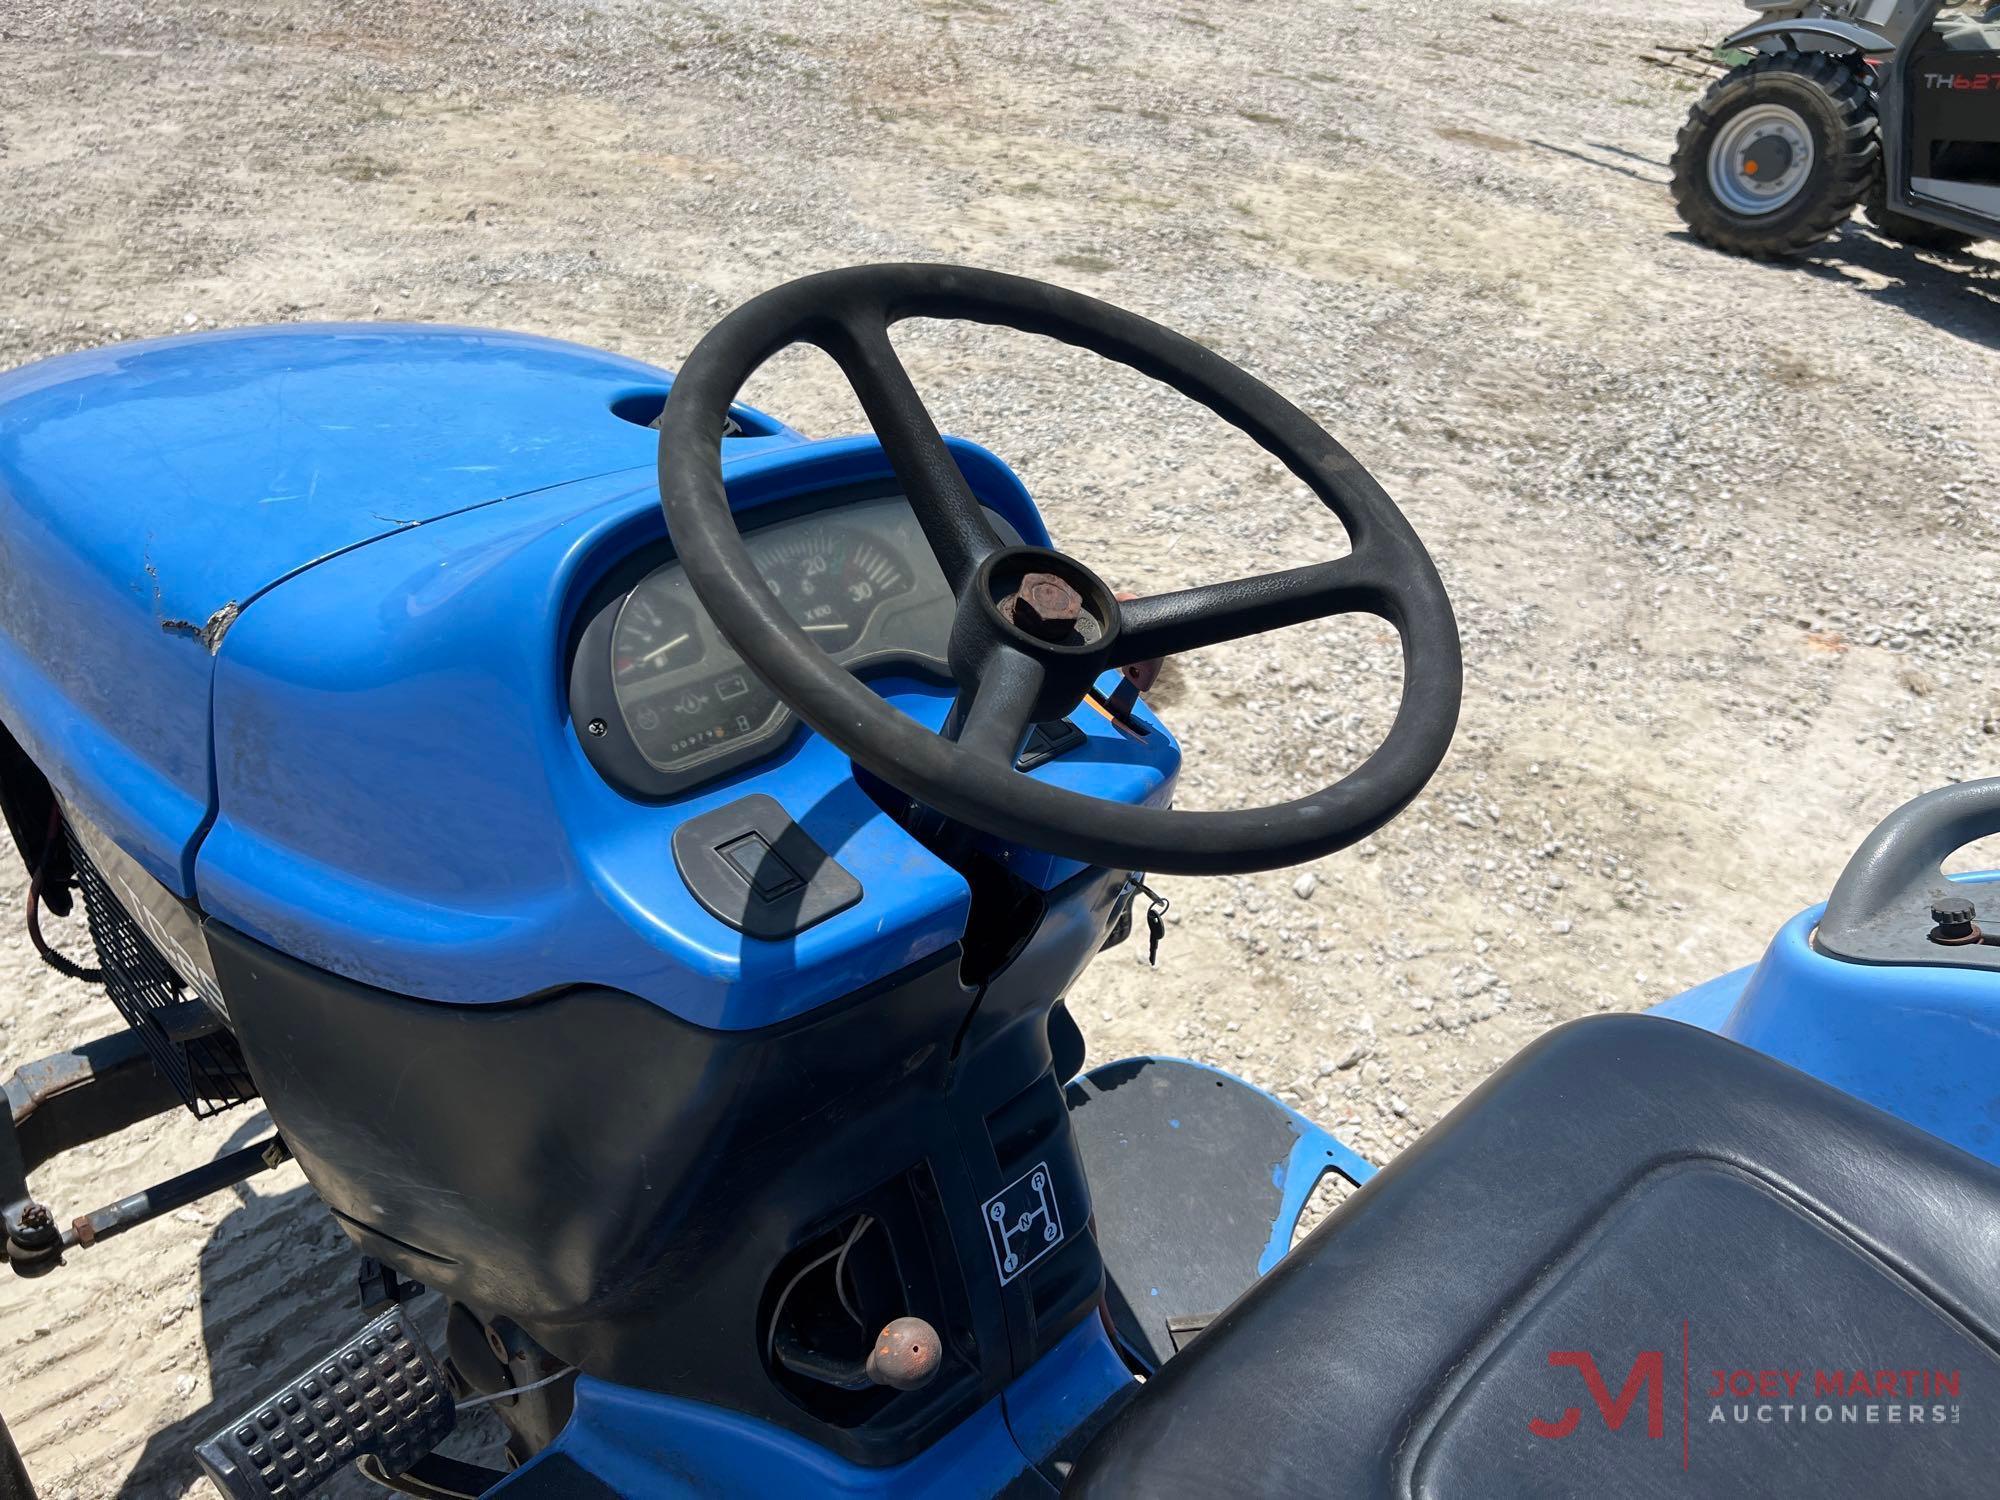 NEW HOLLAND TC29 UTILITY TRACTOR